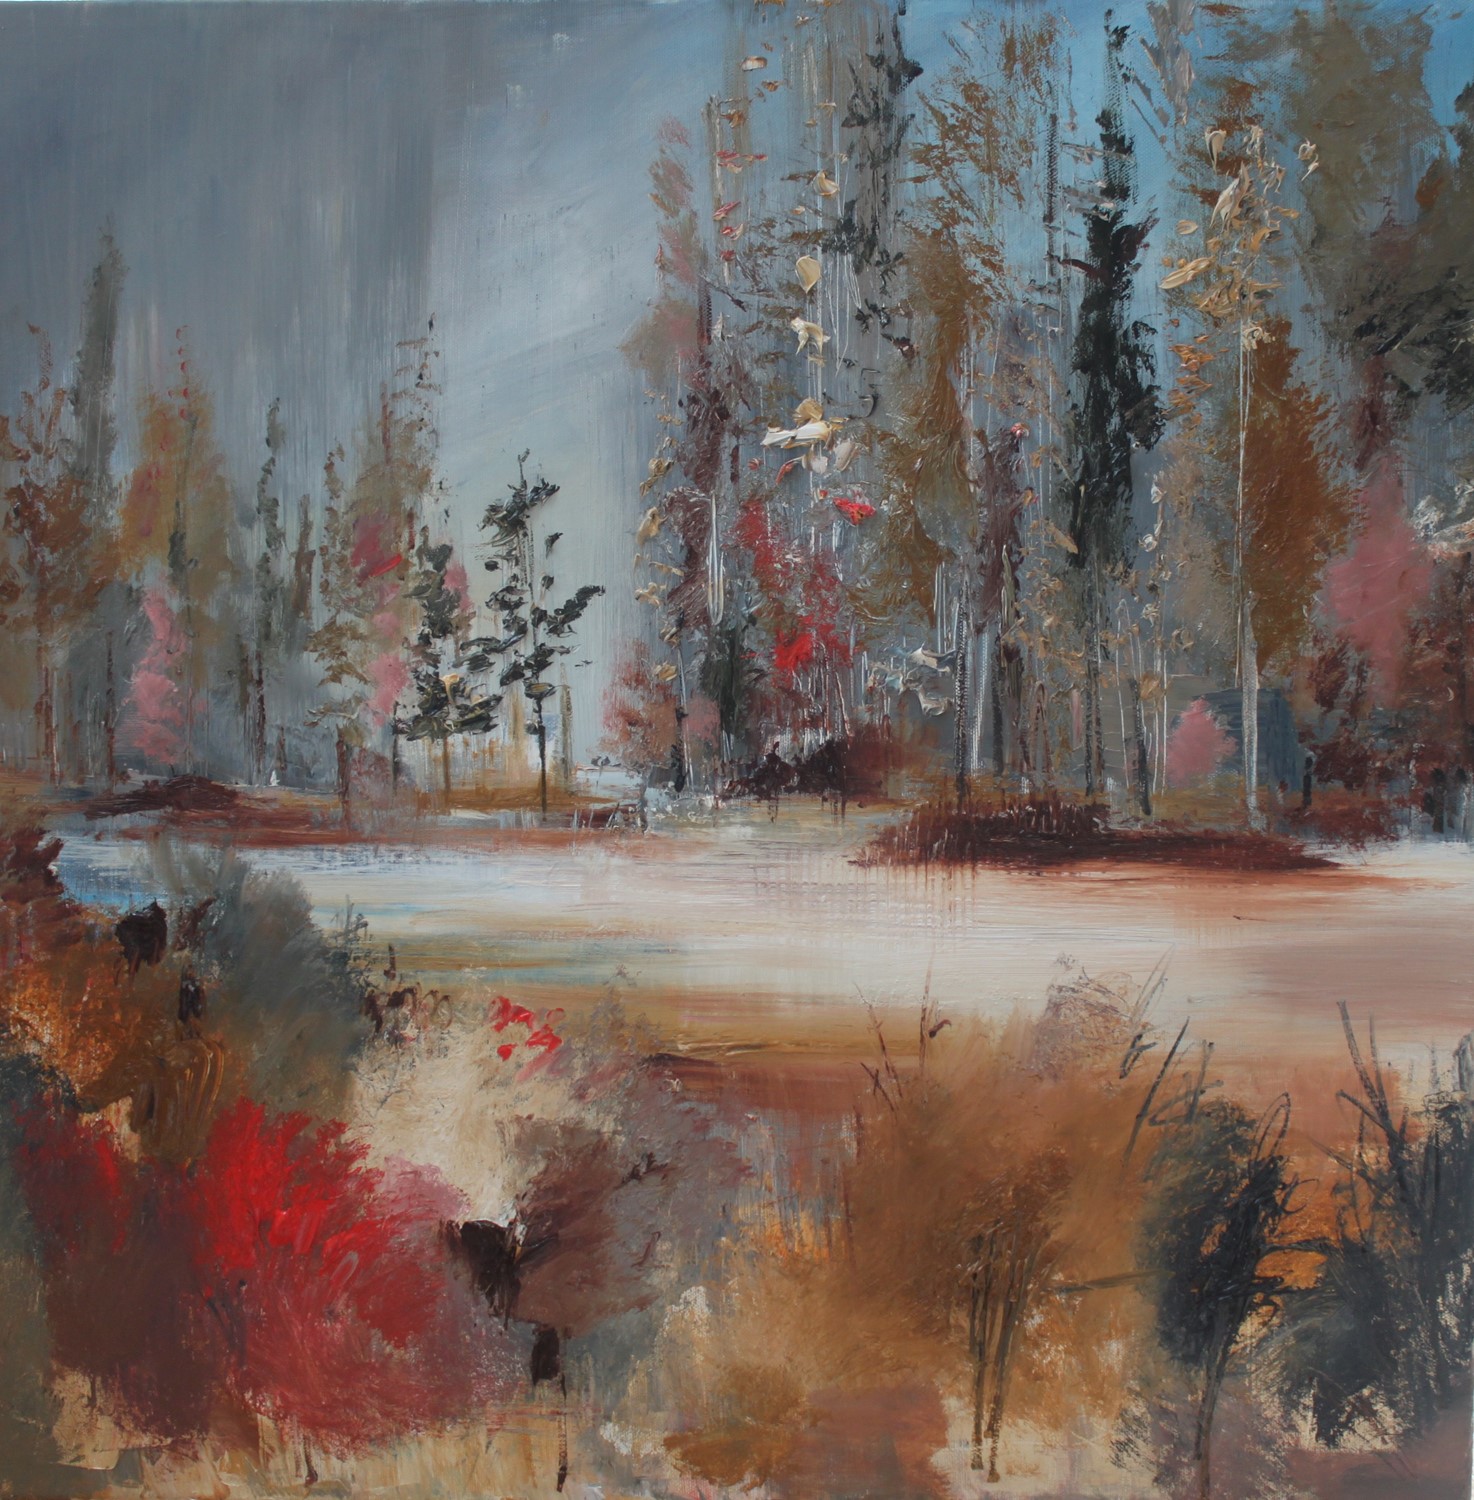 'Forrest Shades' by artist Rosanne Barr